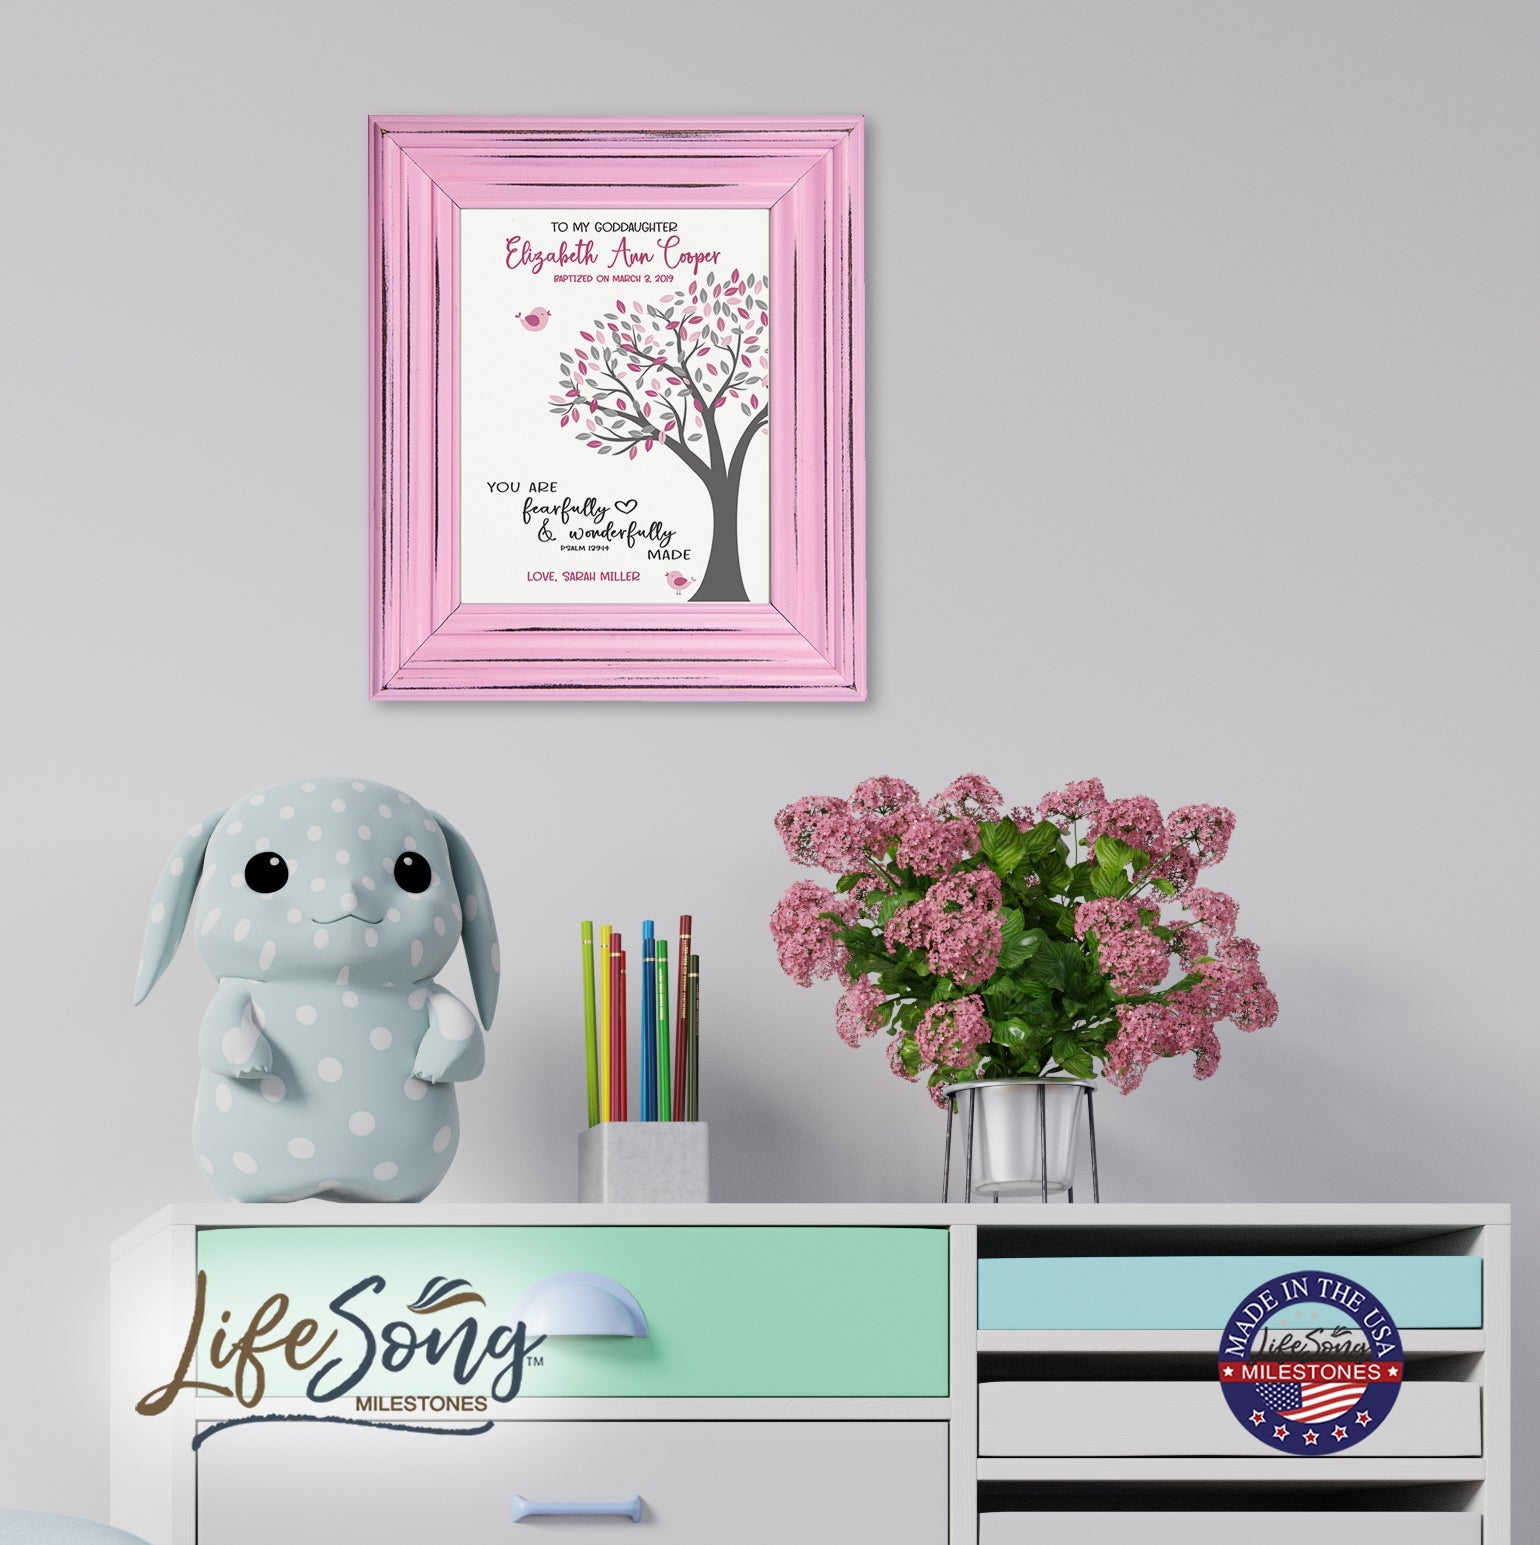 Personalized Baptism gifts for Godchild from Godparents